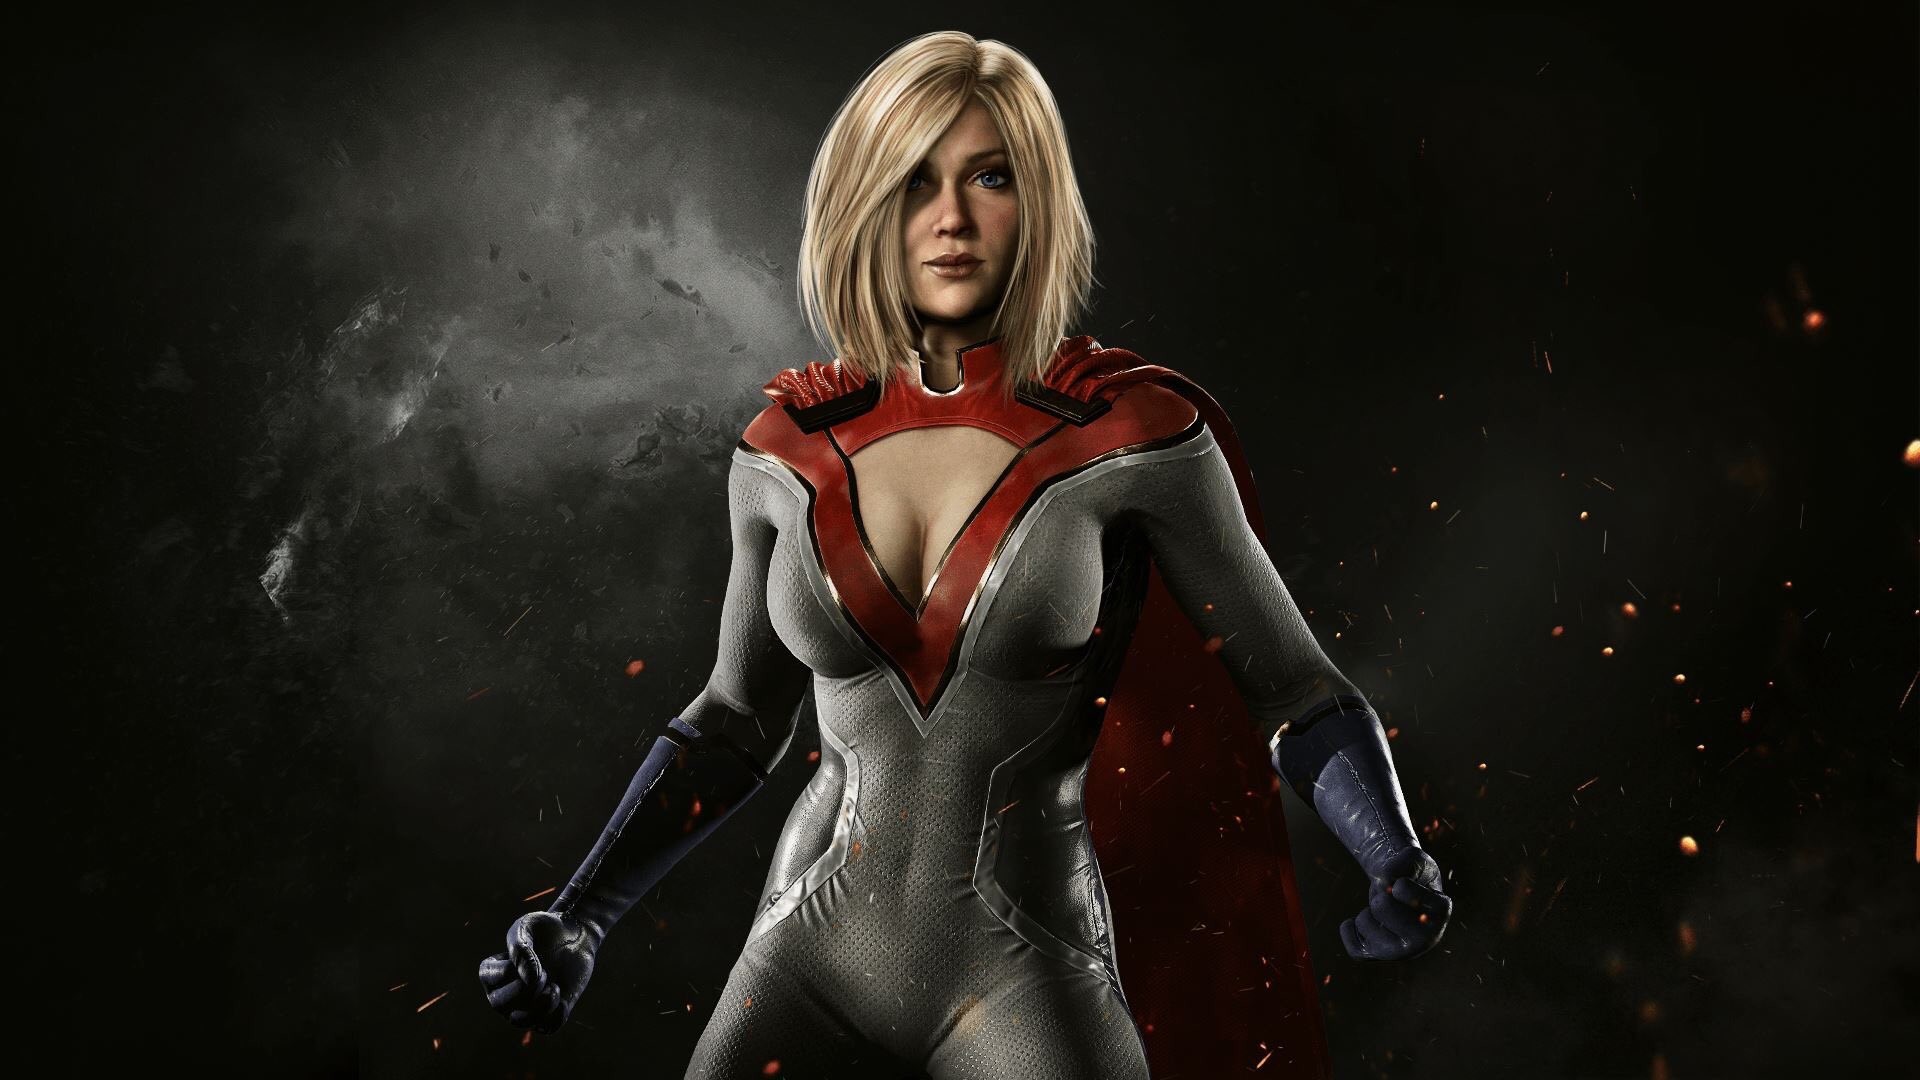 1920x1080 awesome Power Girl Injustice 2 Game 